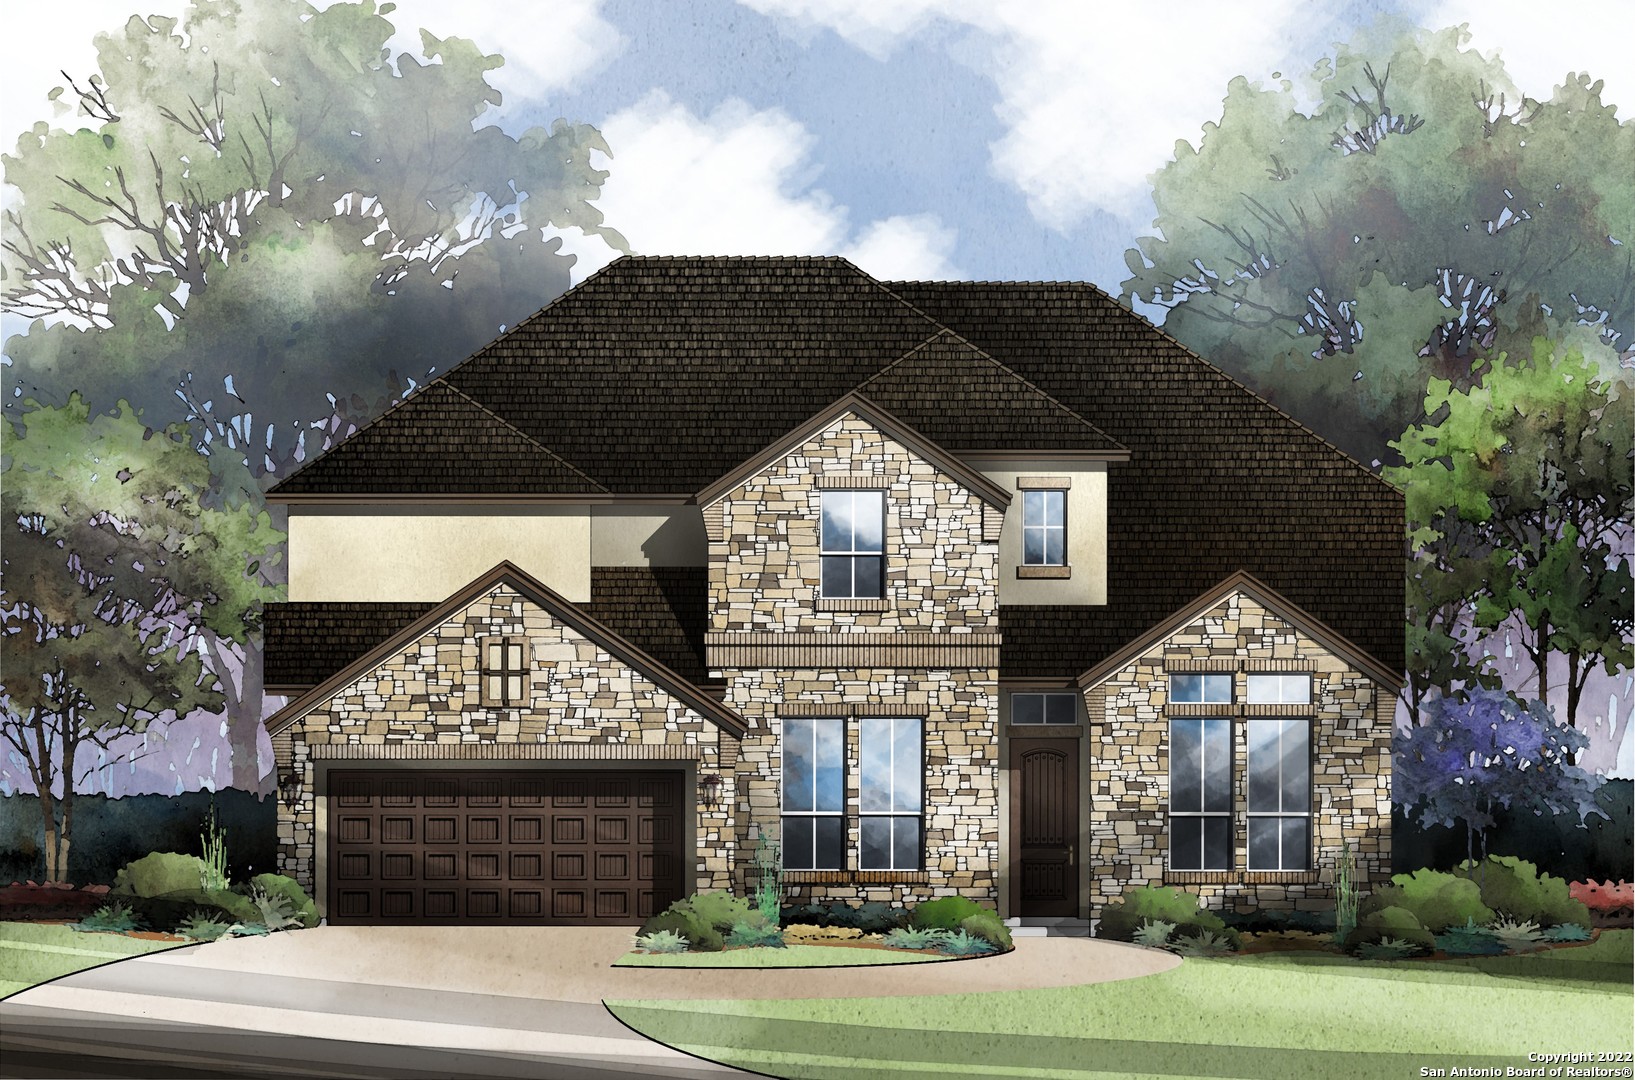 Come & experience the desireable Hill Country Lifestyle in a newly constructed Monticello Home in the gated River Rock Ranch community. Our EDWIN plan boasts of 3660sqft, 2 story -5 bed/4 bath. It Includes a formal dining room, breakfast area, study, game room, flex room and a large covered patio (20x10) perfect for entertaining guests. This home backs to a greenspace.  Complete with high ceilings & oversized windows.  Current pricing features a multiitude of upgrades including cabinets, flooring, countertops, bay window in master bedroom, pre-plumbed for future water softner & pre-wired for future home security.  Other features include an attractive landscaping package complete with full sod, irrigation, and cedar privacy fence.